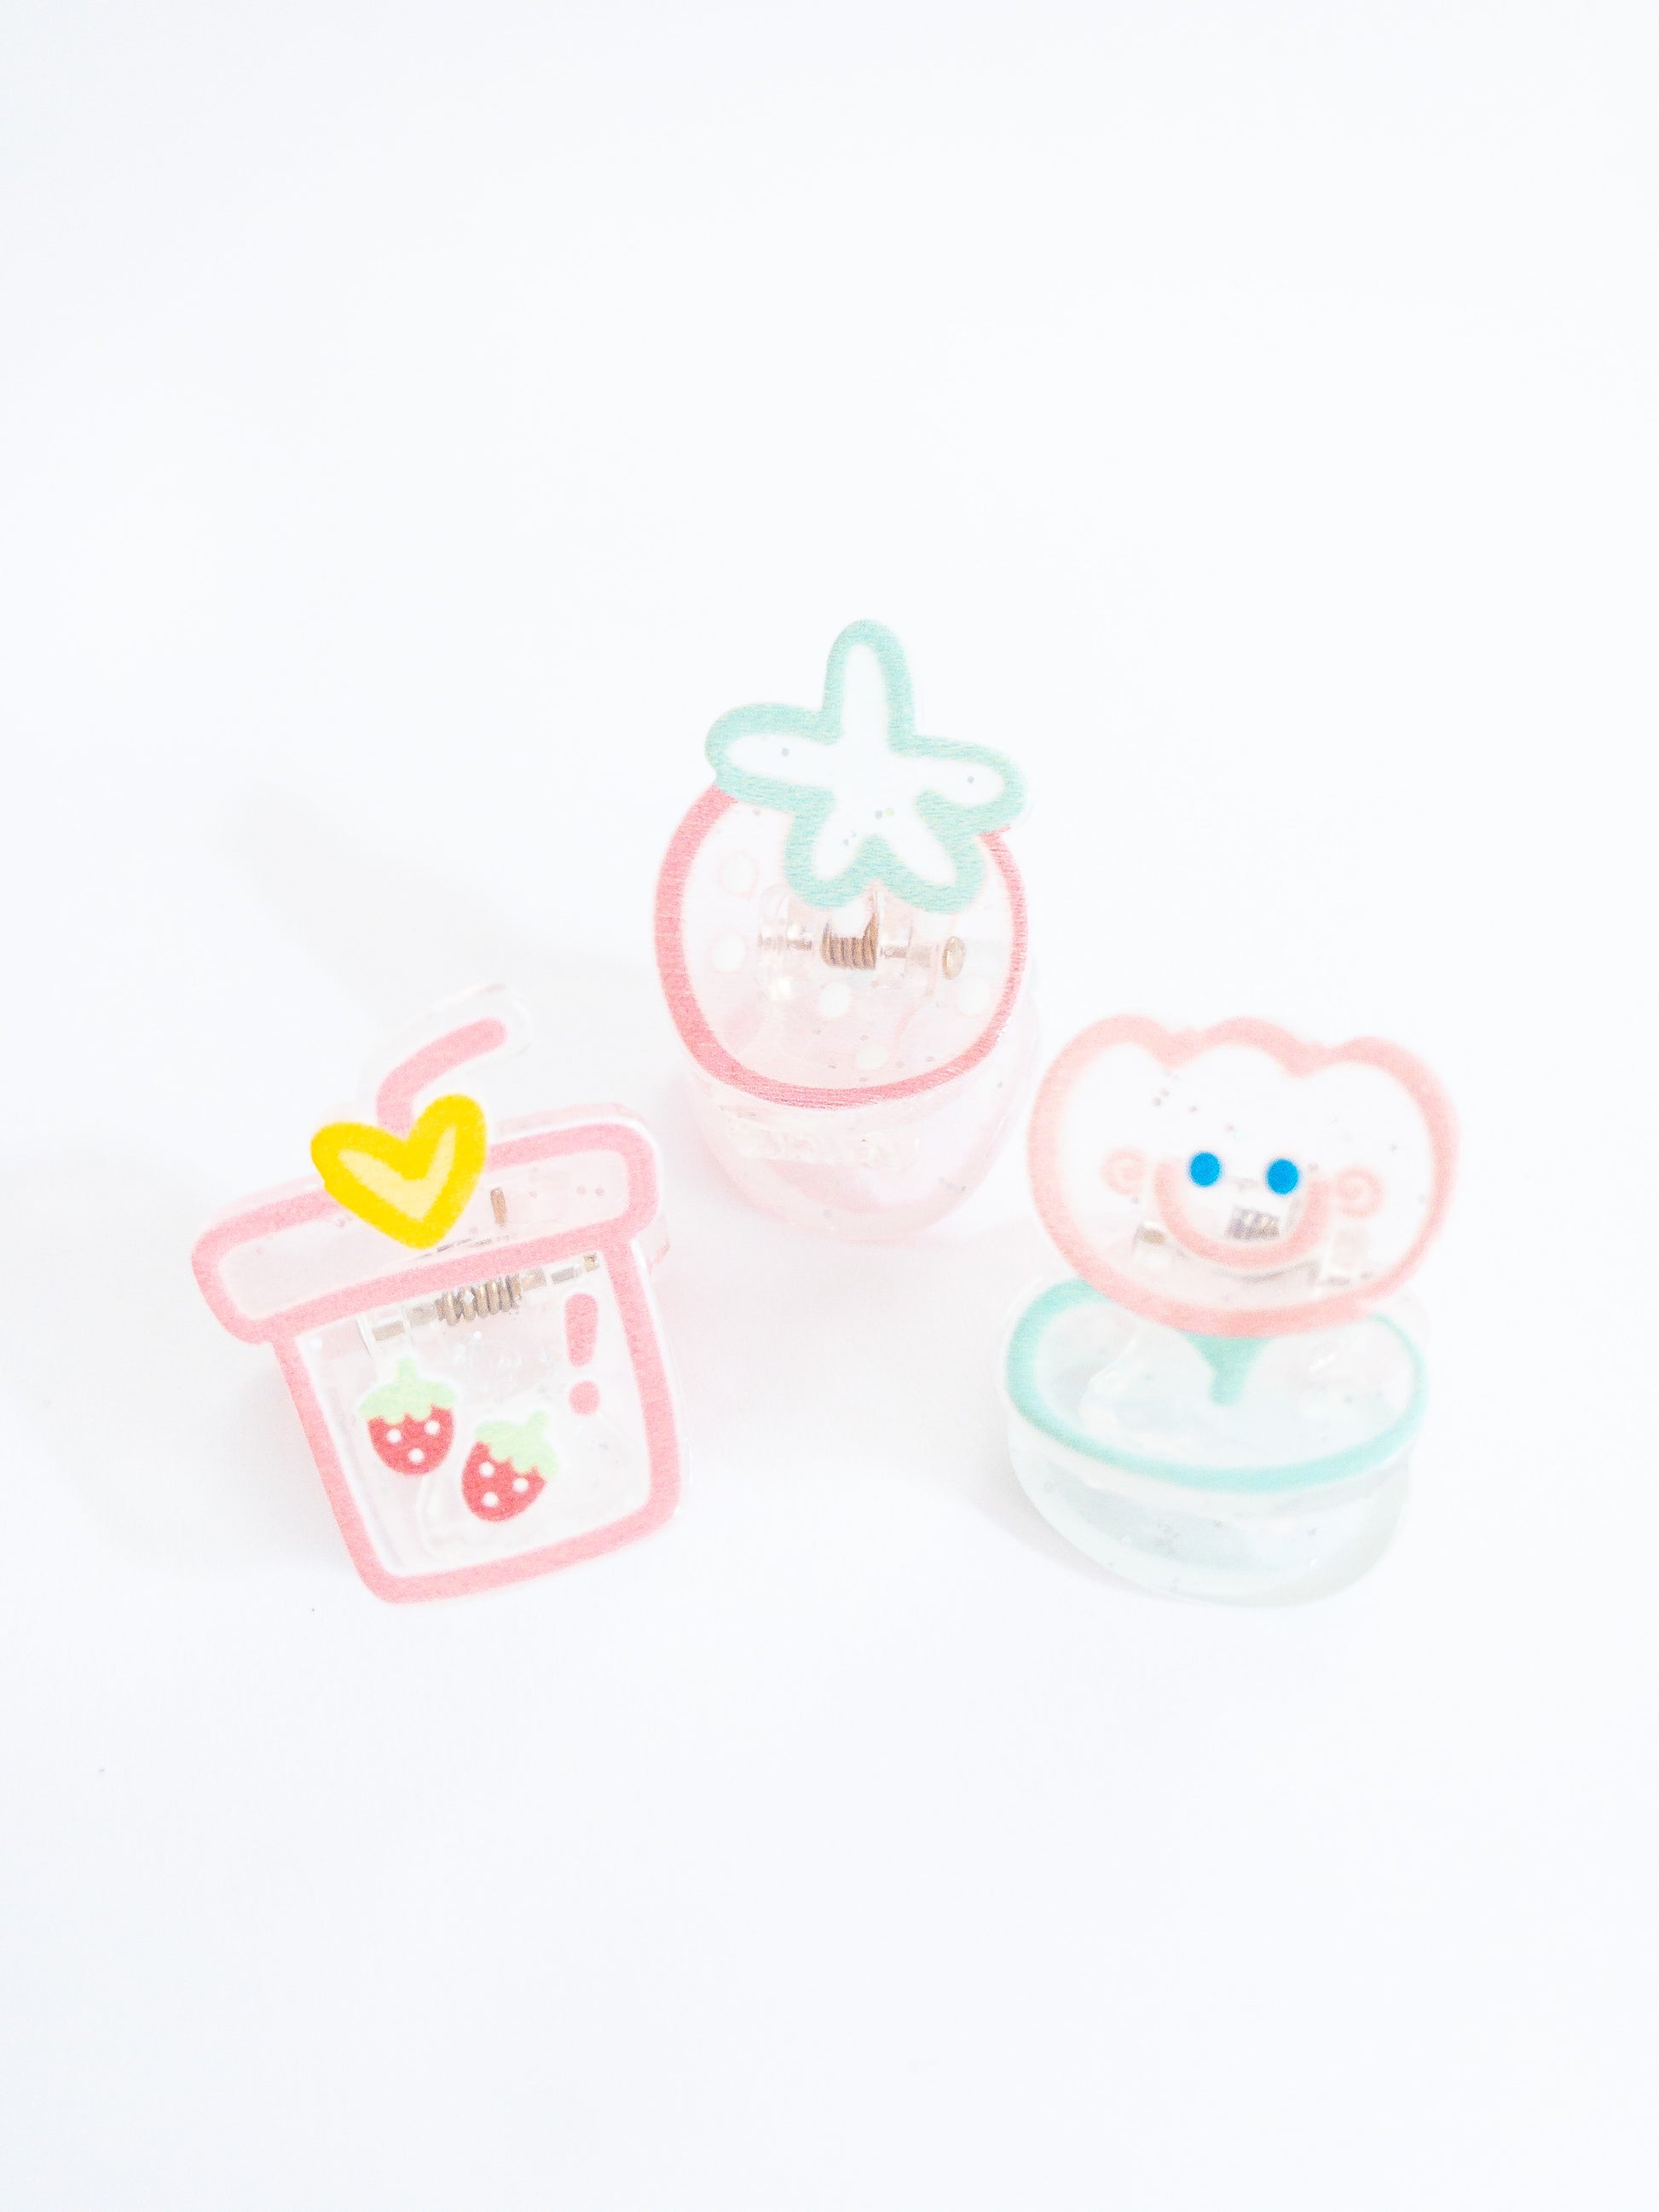 Just a happy tulip and her strawberry treats! A 3-pack of translucent, glittery small hair claws in the shape of a strawberry bubble tea, smiley tulip, and a juicy strawberry.